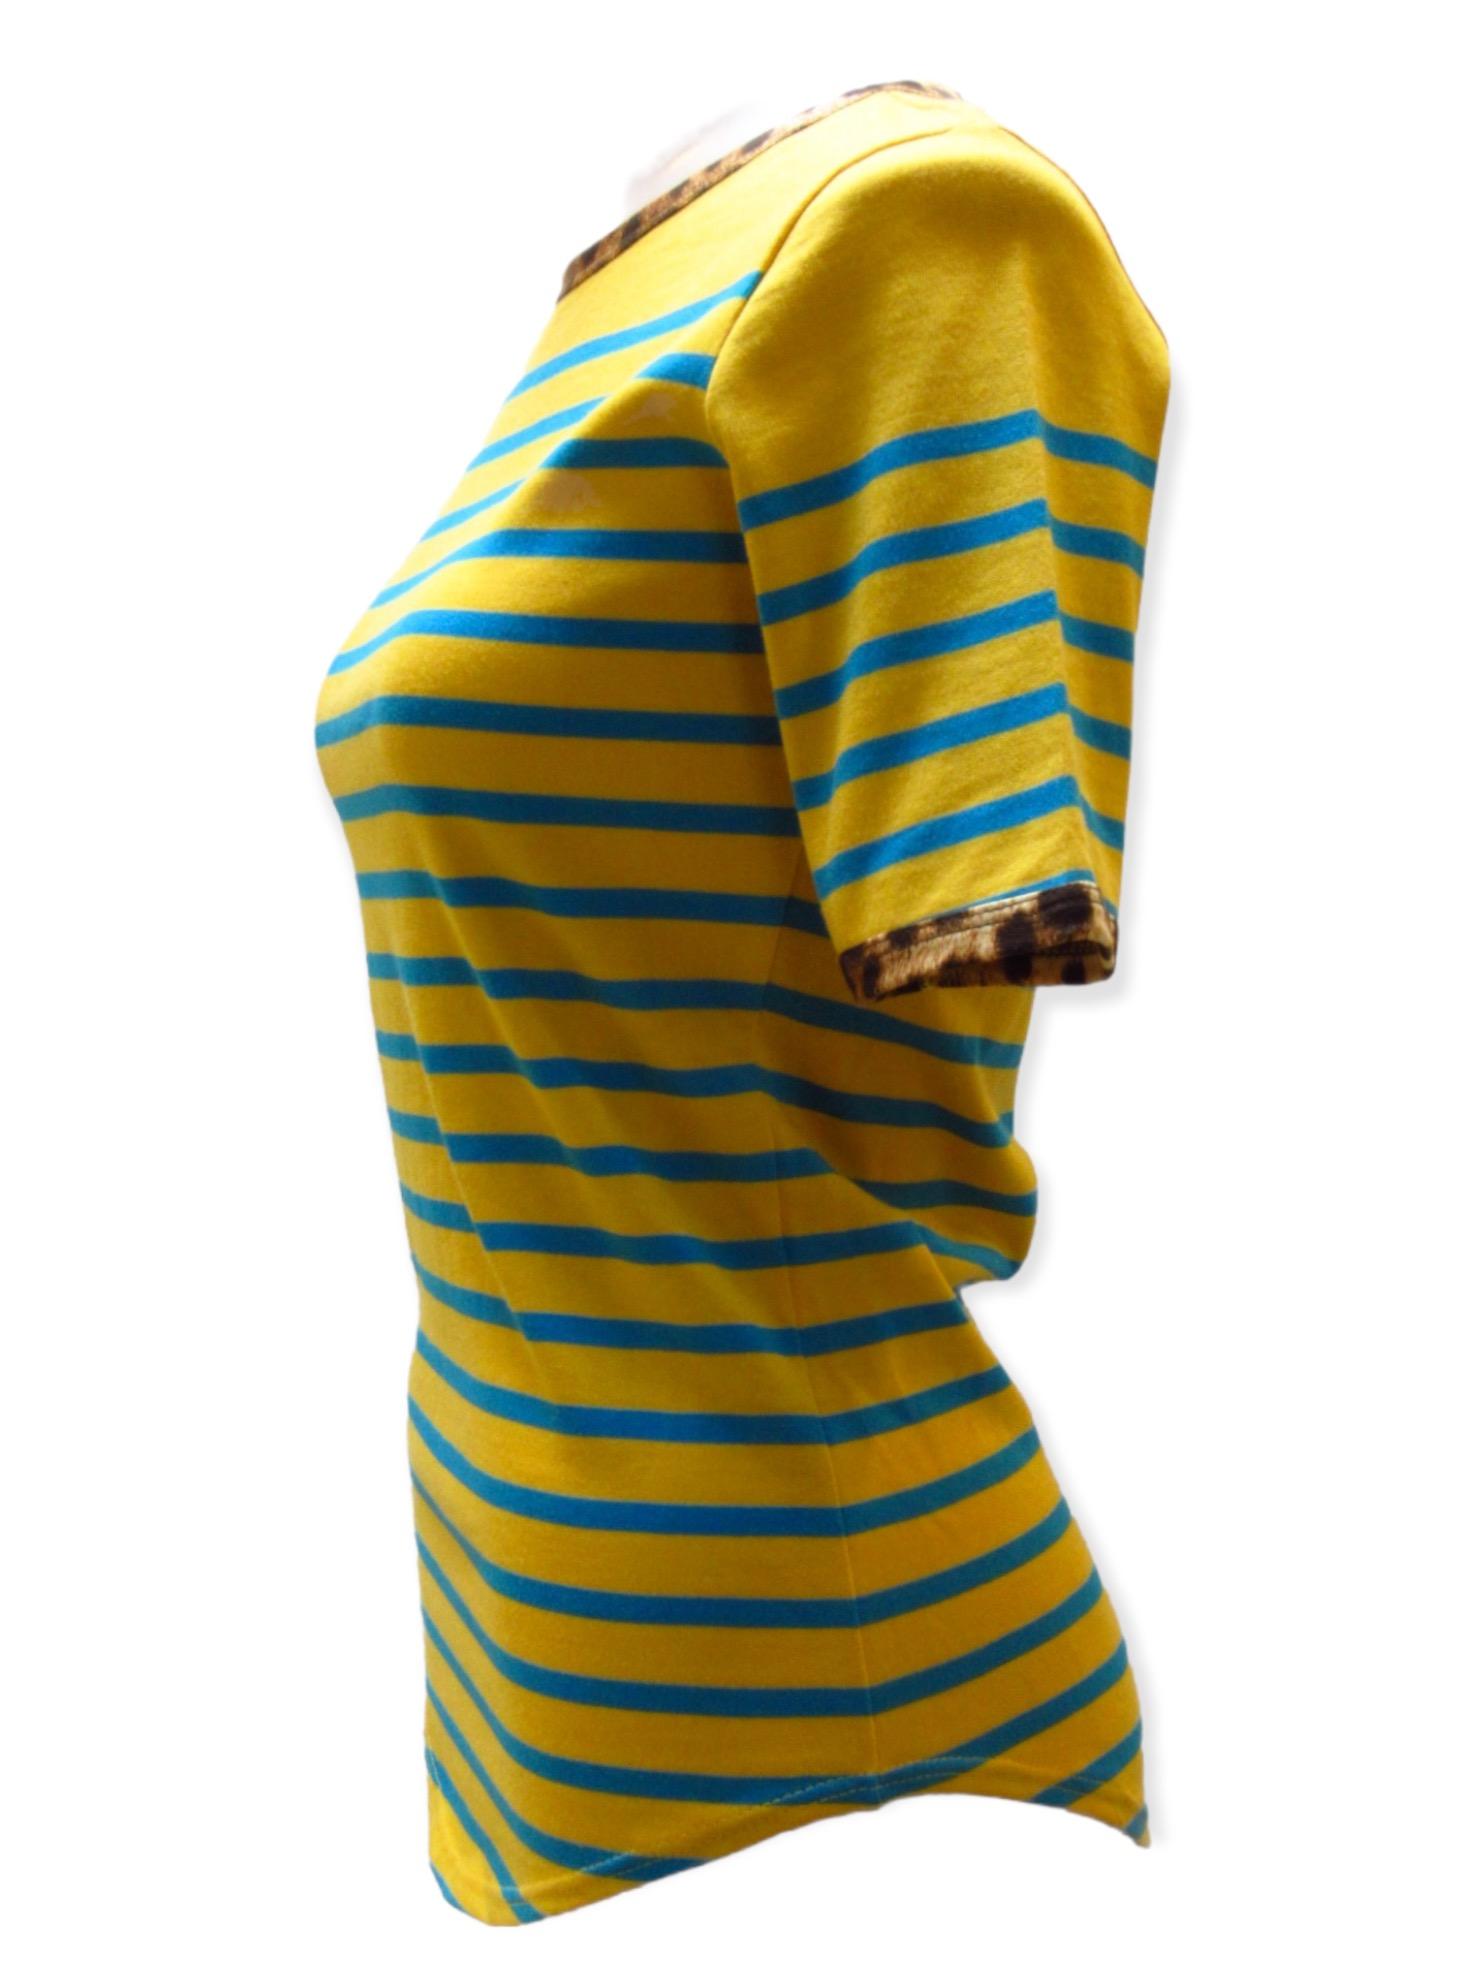 Jean Paul Gaultier Yellow Striped Tee In New Condition For Sale In Laguna Beach, CA